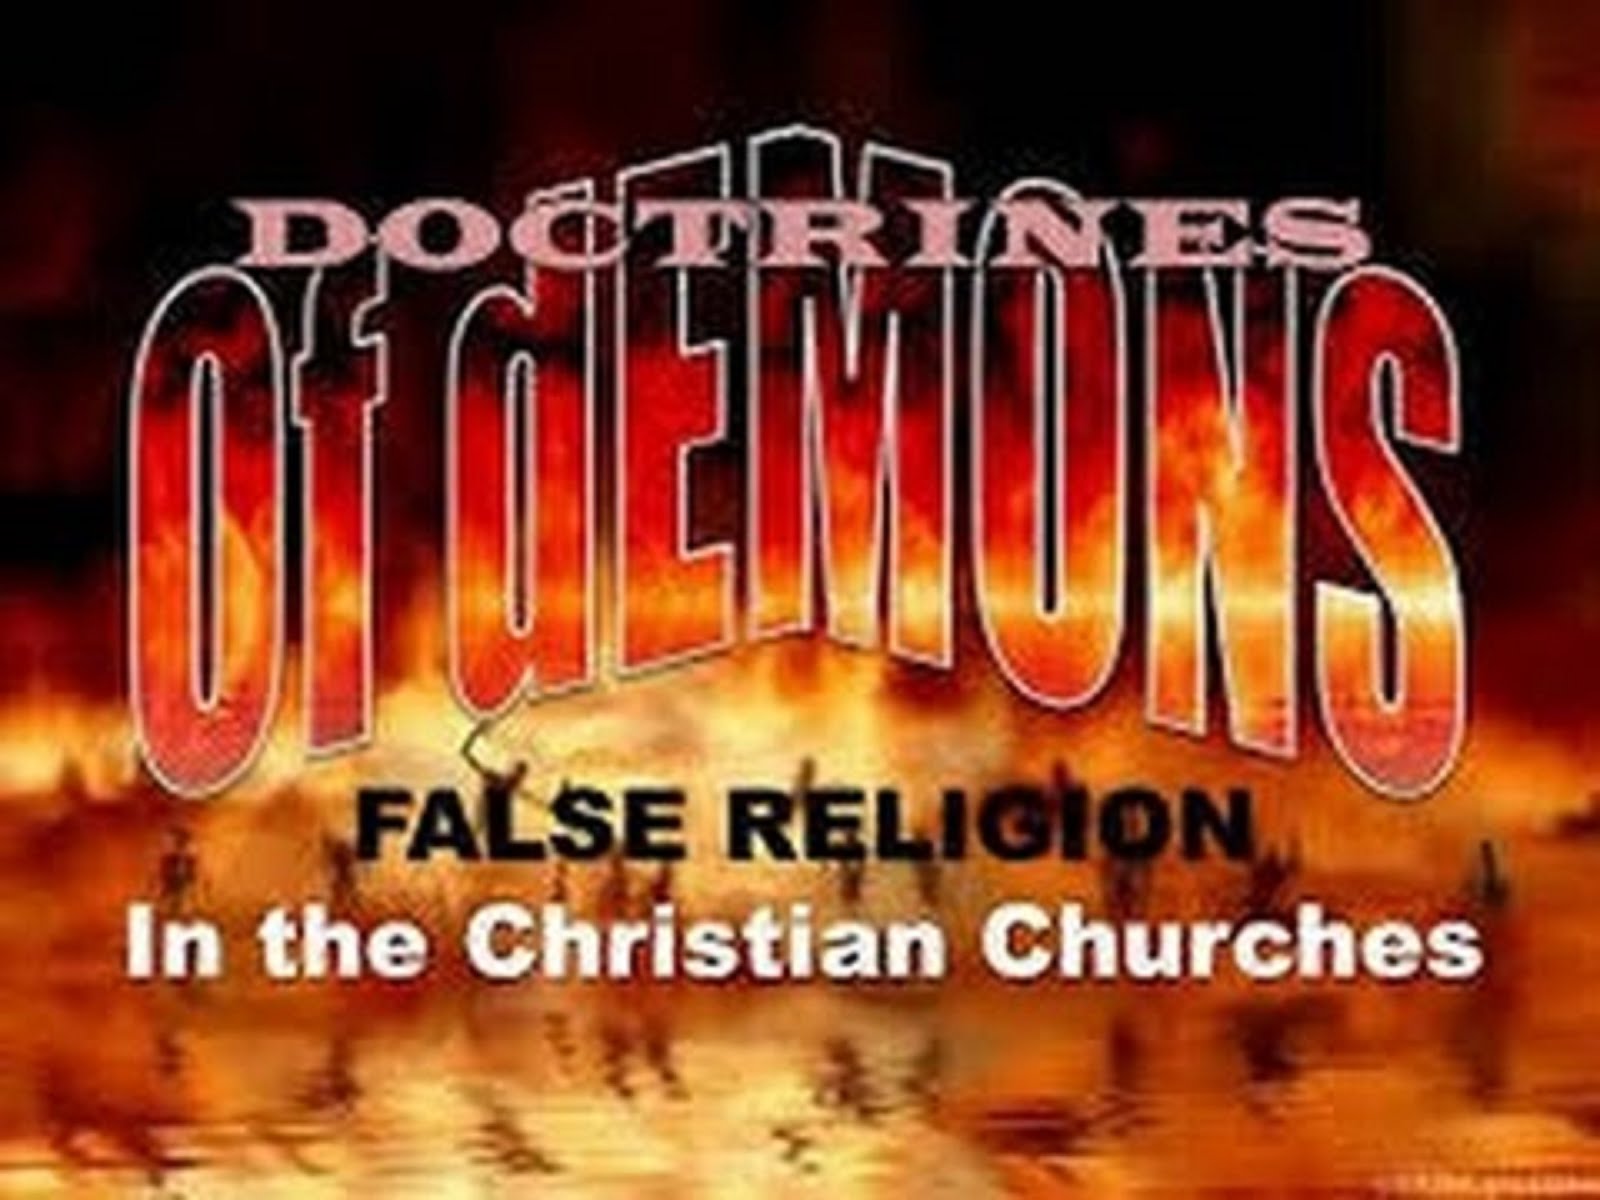 CHRISTIANITY IS A FALSE RELIGION